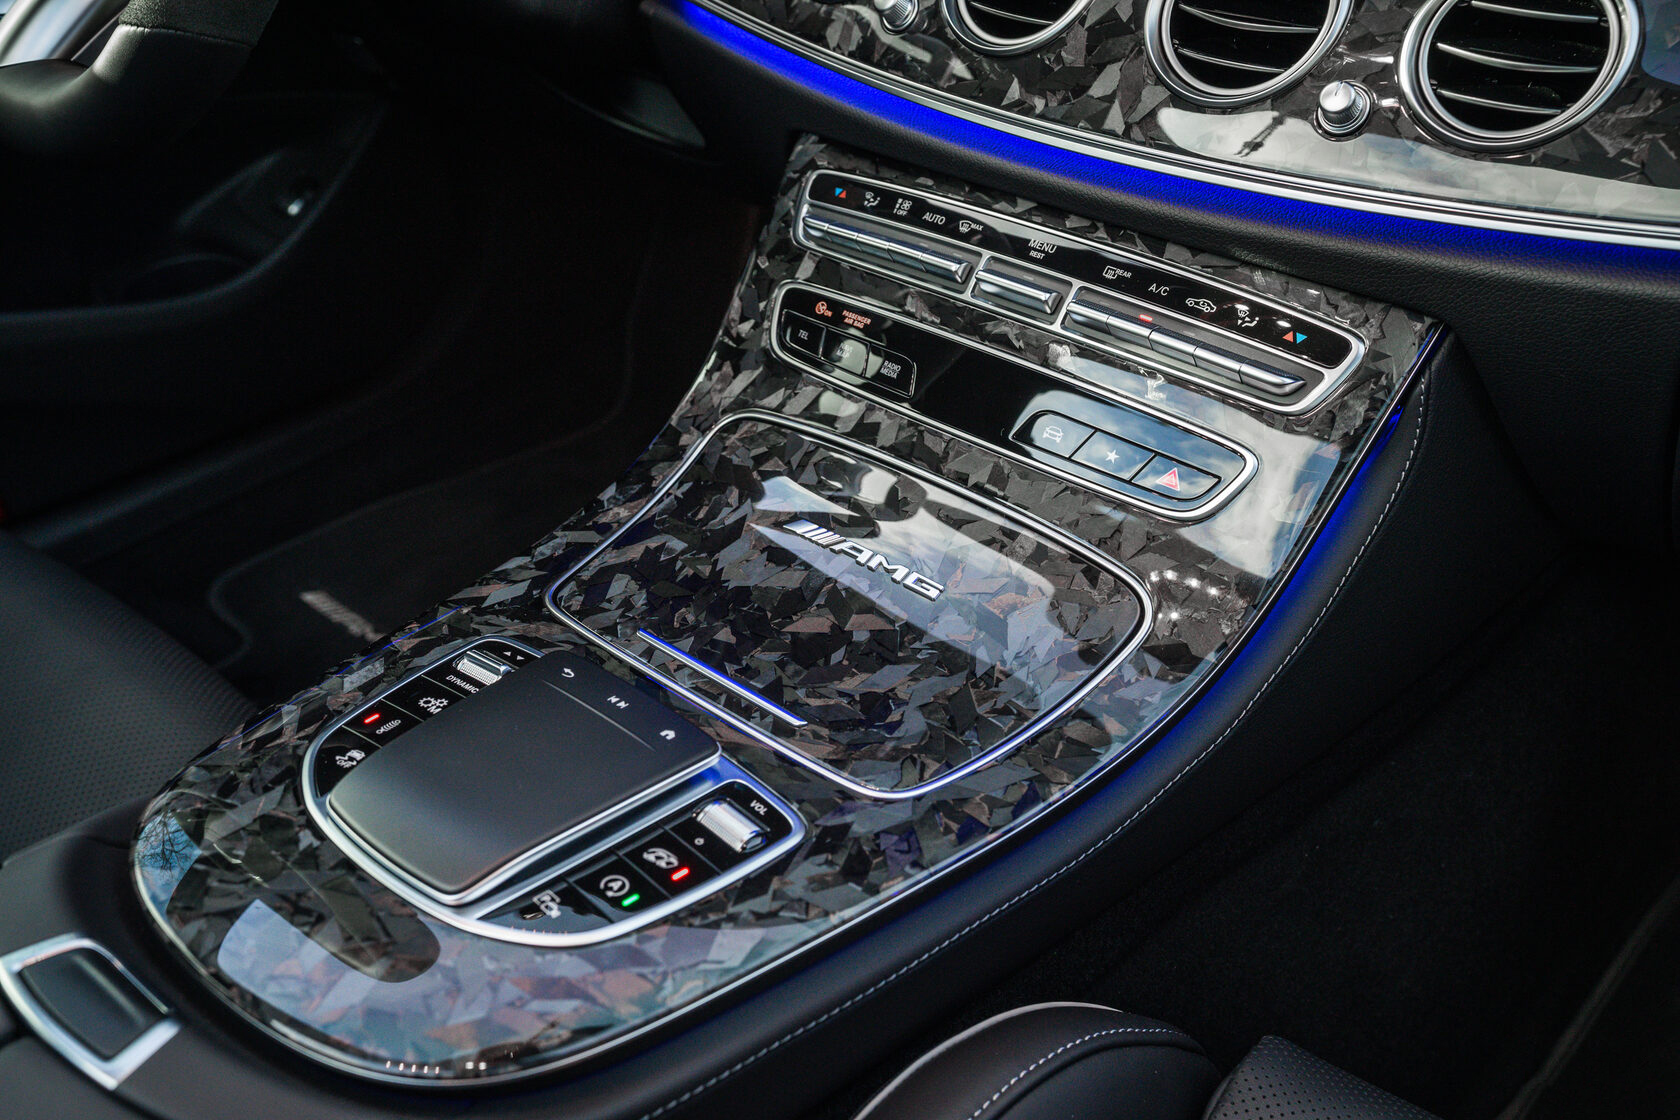 LHD Interior panels Forged Carbon for Mercedes E-class AMG W213 E63 AMG Restyling